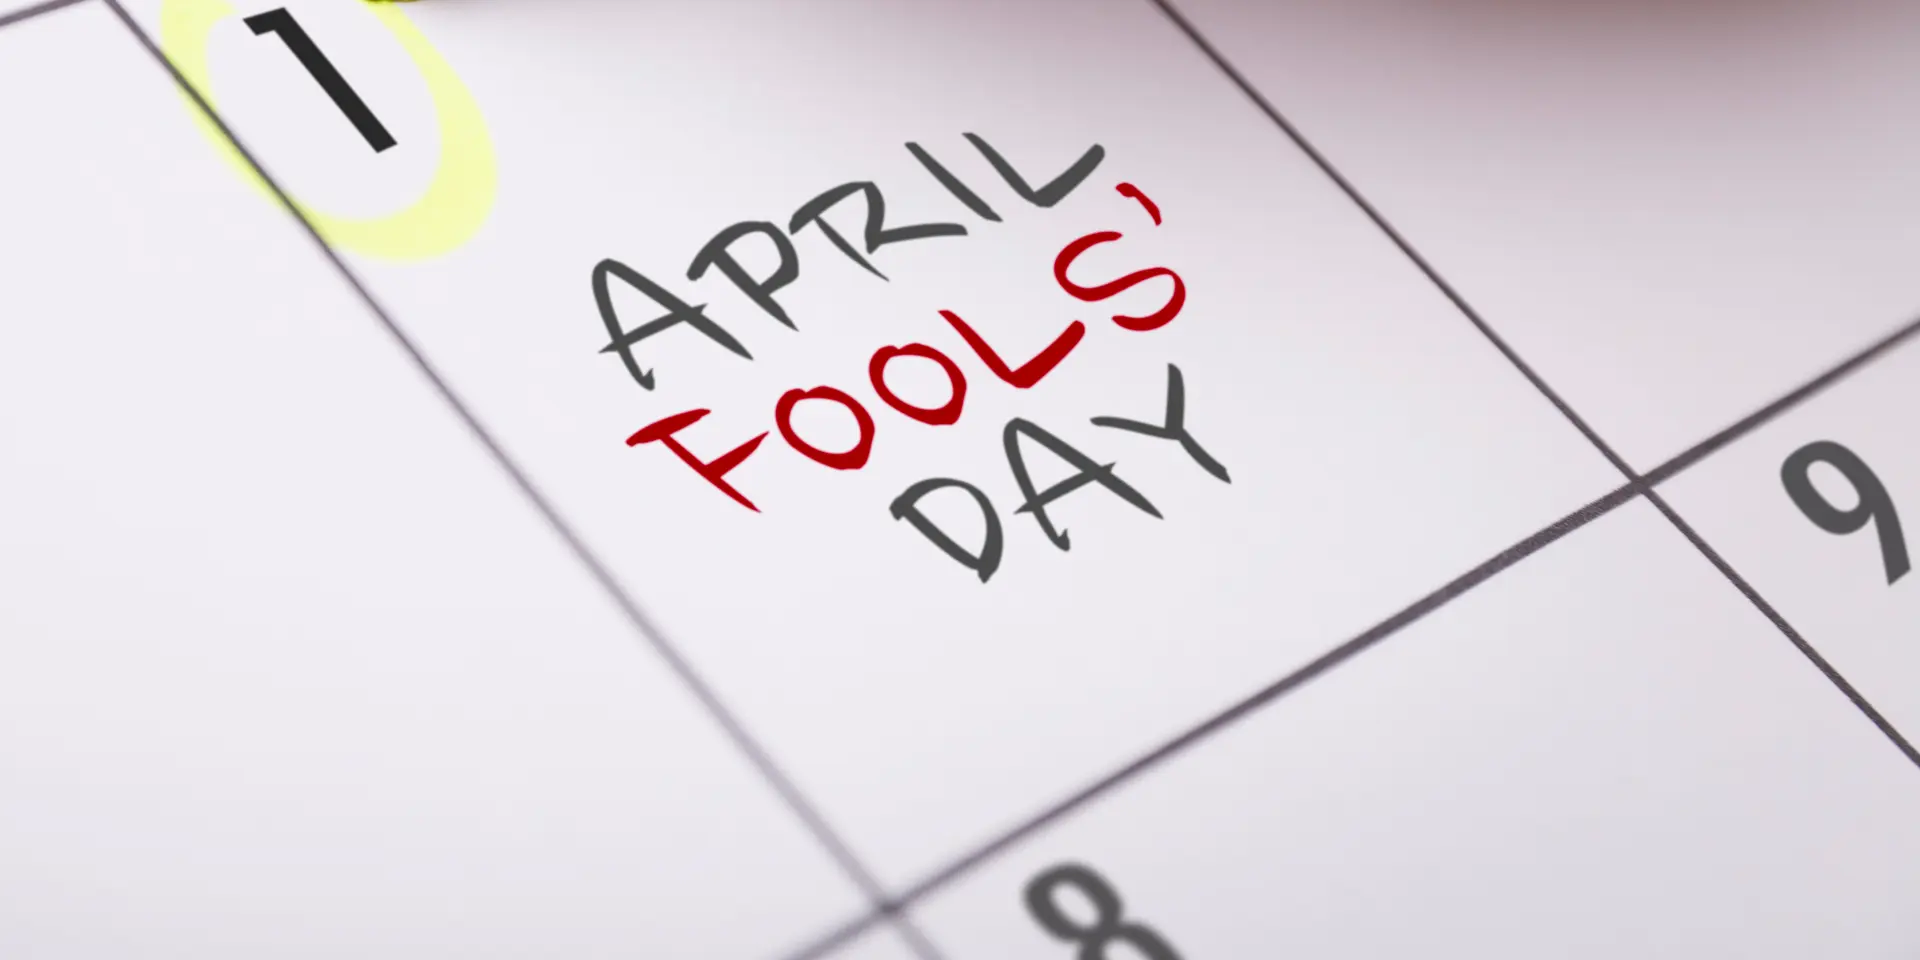 April Fools' Day: A Celebration of Playful Pranks and Good Humor